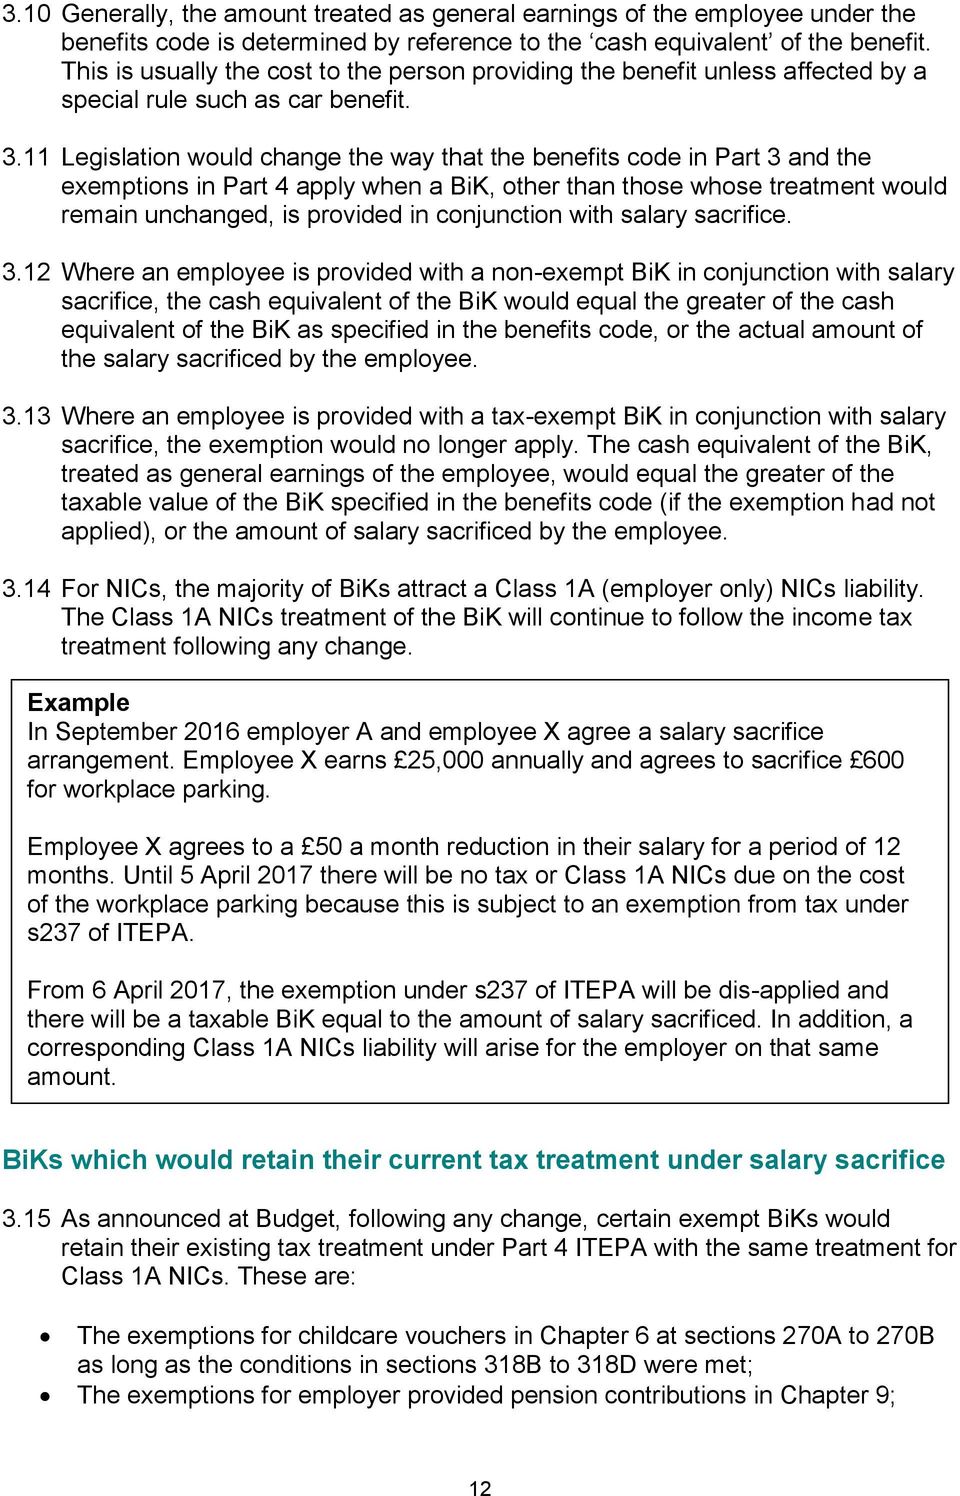 11 Legislation would change the way that the benefits code in Part 3 and the exemptions in Part 4 apply when a BiK, other than those whose treatment would remain unchanged, is provided in conjunction